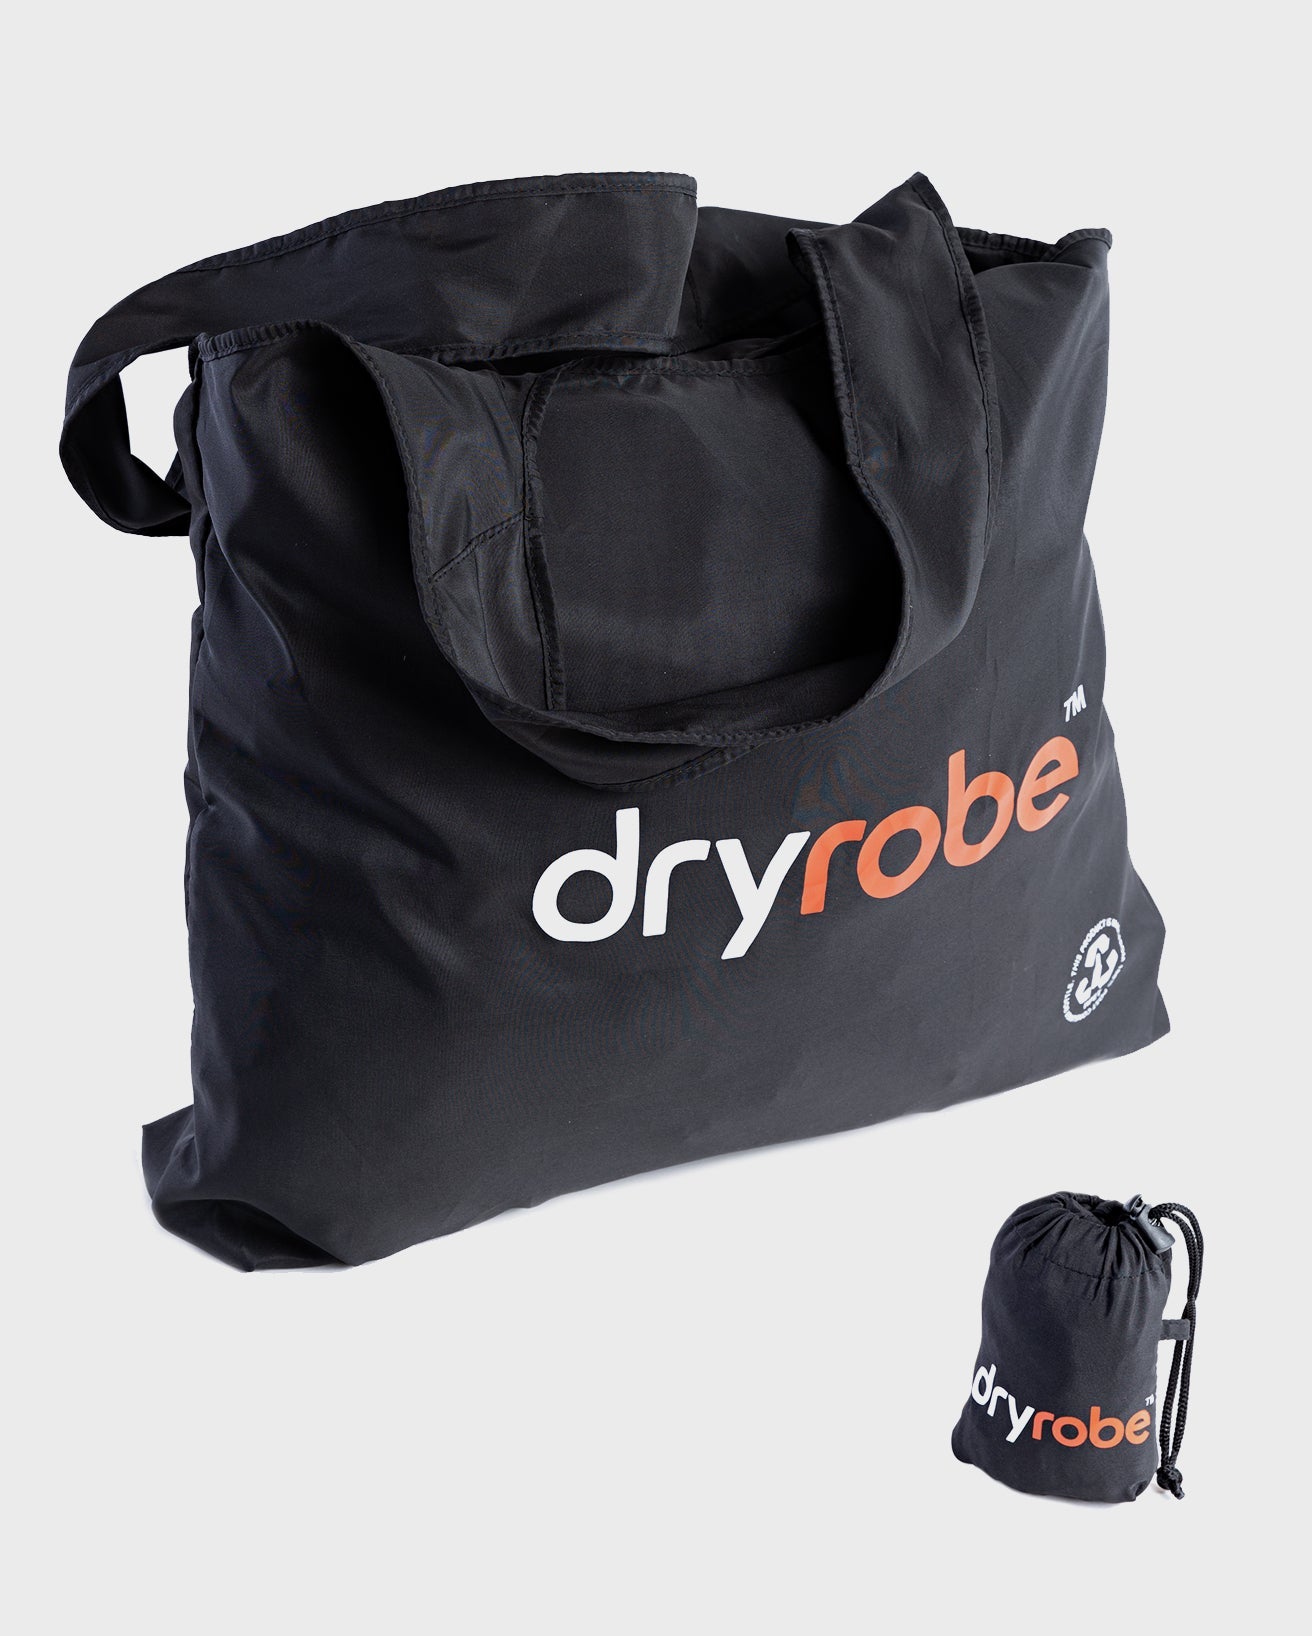 dryrobe® Tote Bag shown packed in the carrying pouch